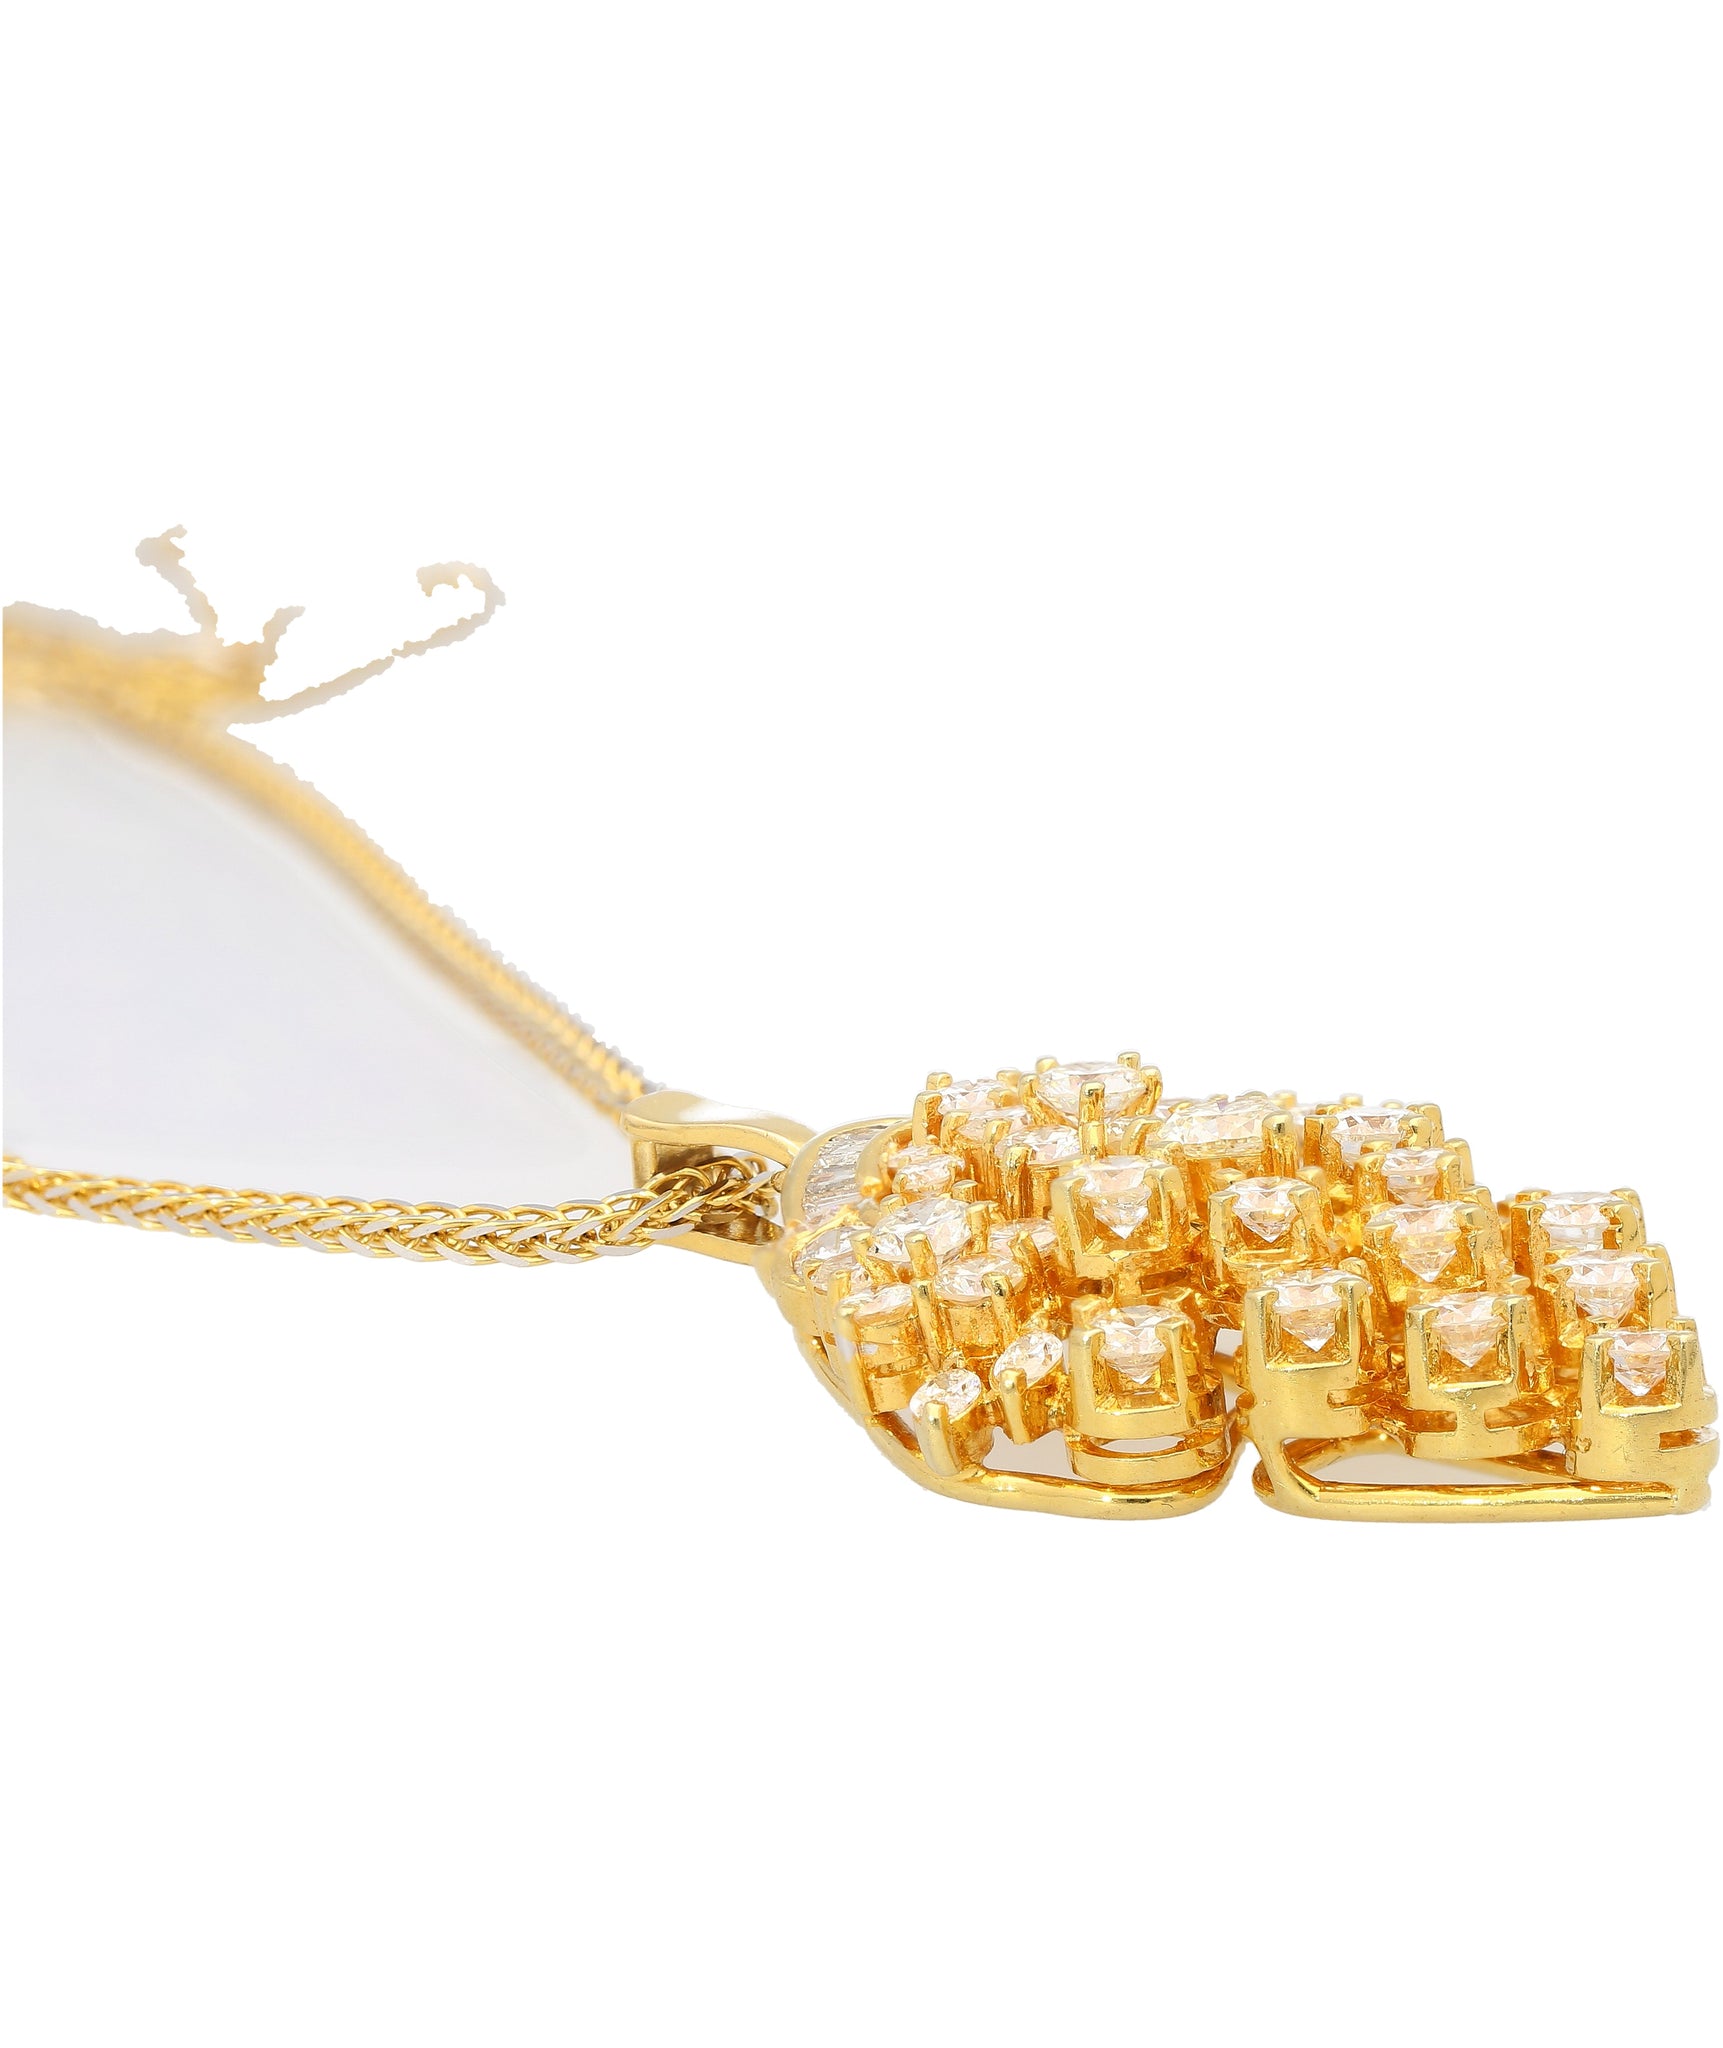 5 CTTW Diamond Cluster Multi Cut Pendant in 18K Yellow Gold Necklace